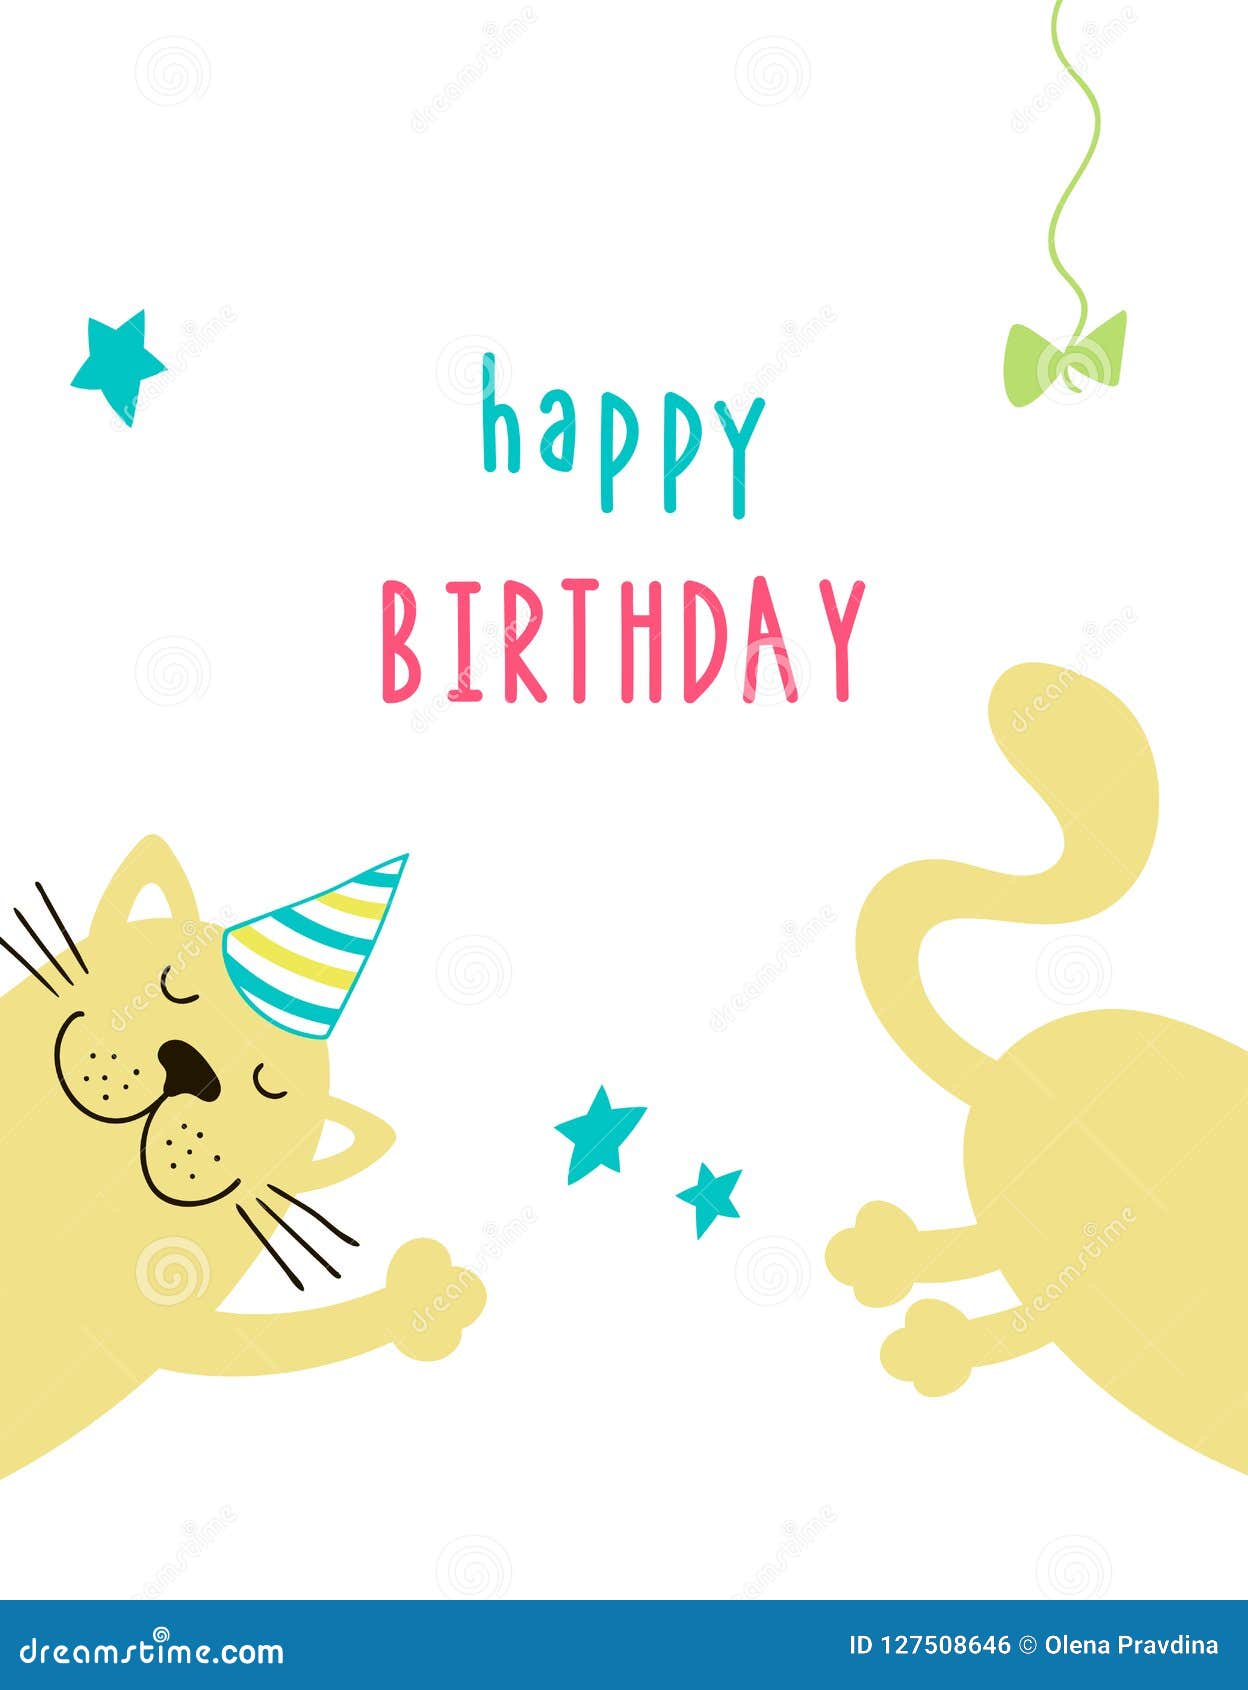 Background with Cute Cartoon Cat and the Inscription Happy Birthday ...